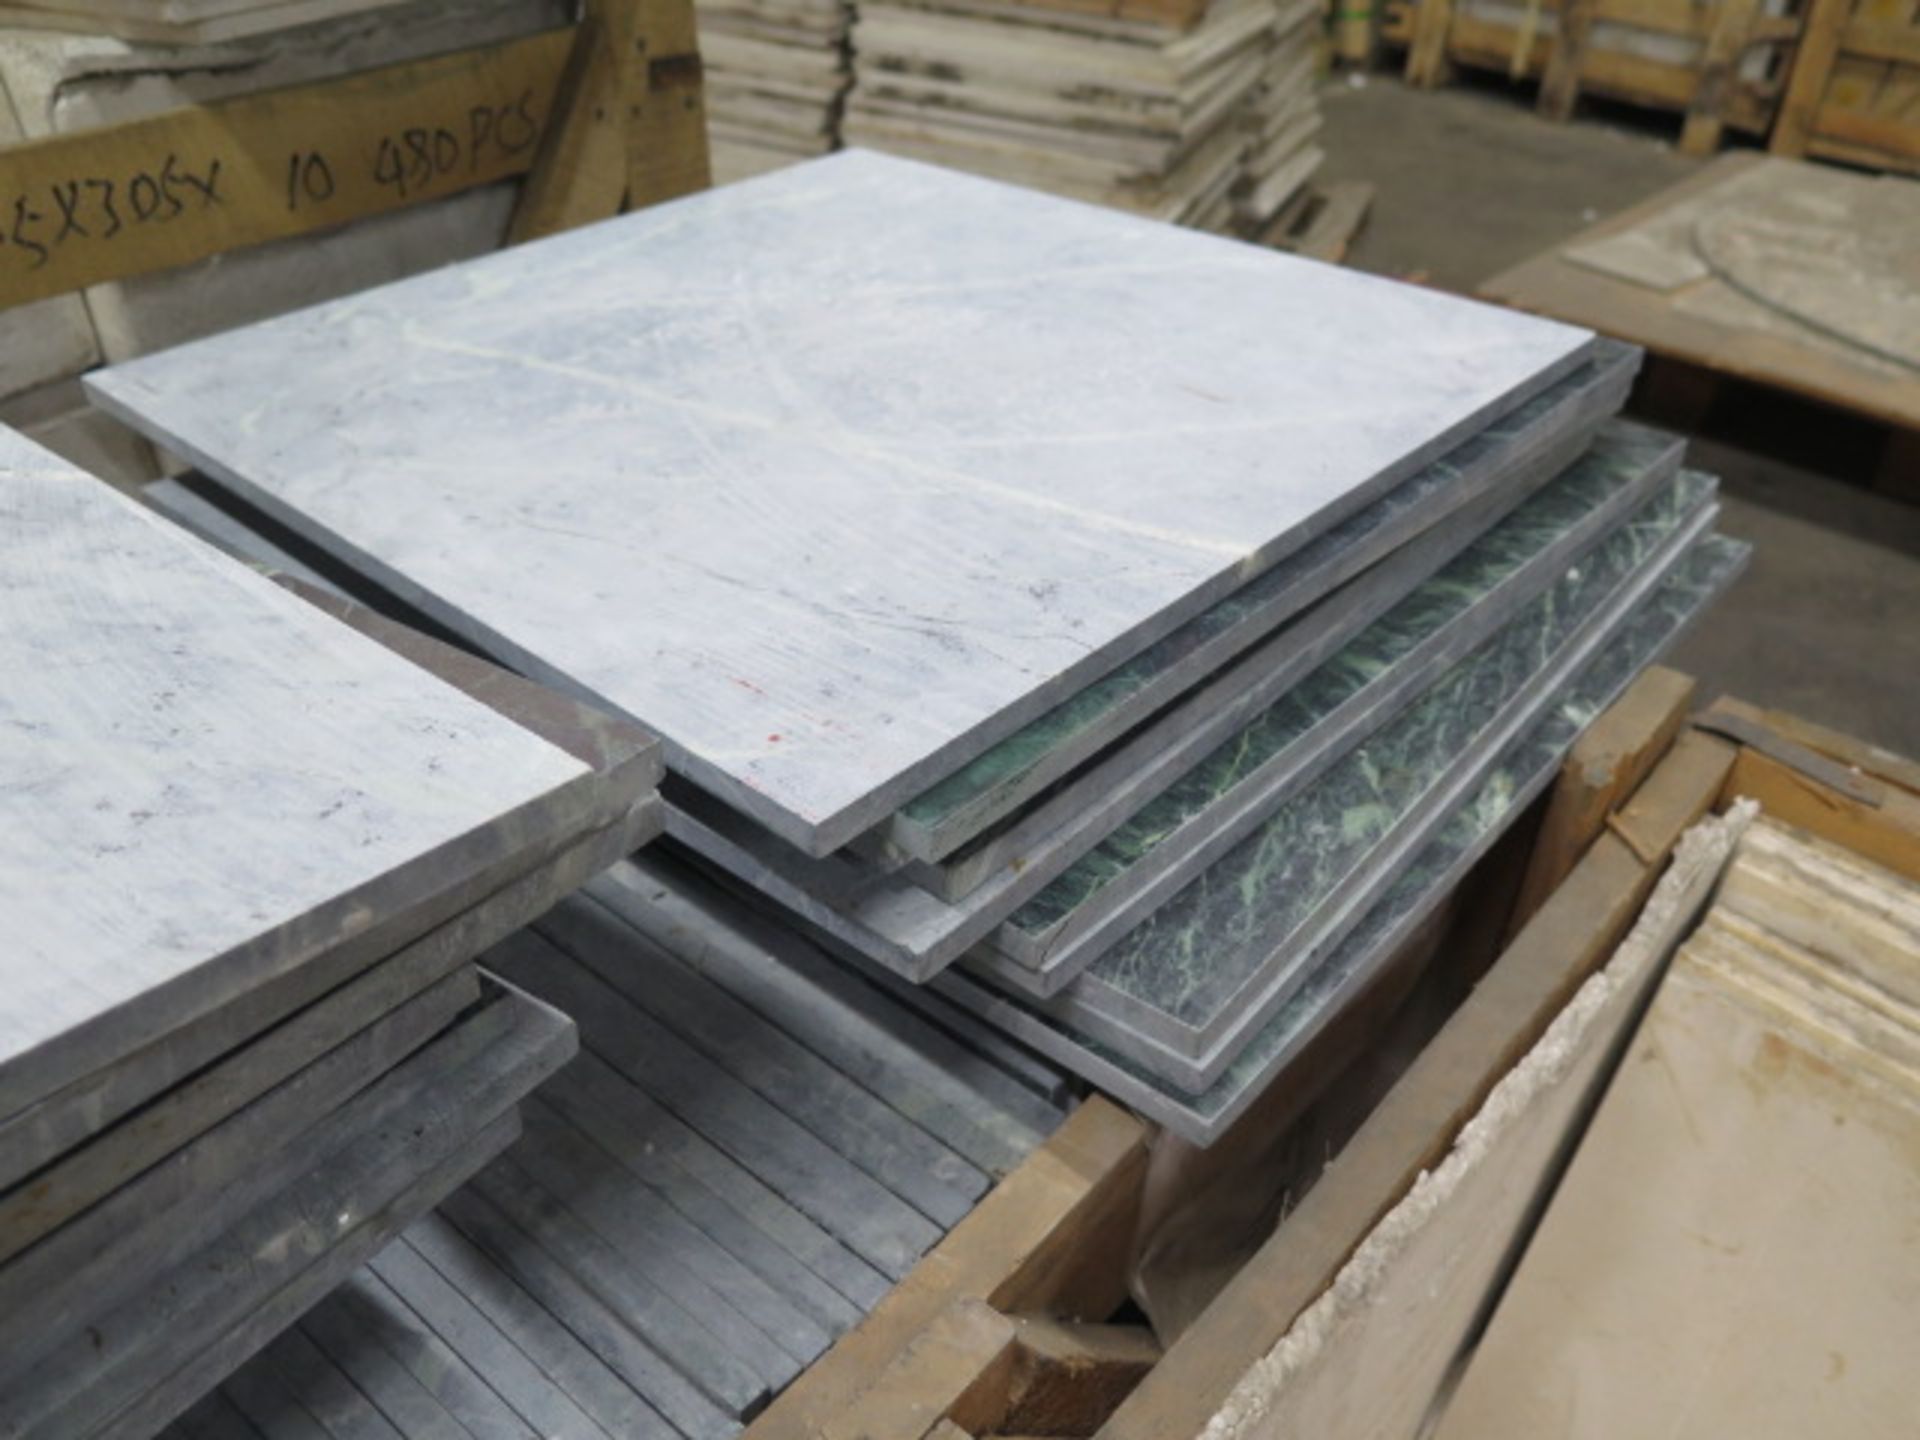 18" x 18" Jade Marble Tiles (SOLD AS-IS - NO WARRANTY) - Image 4 of 5